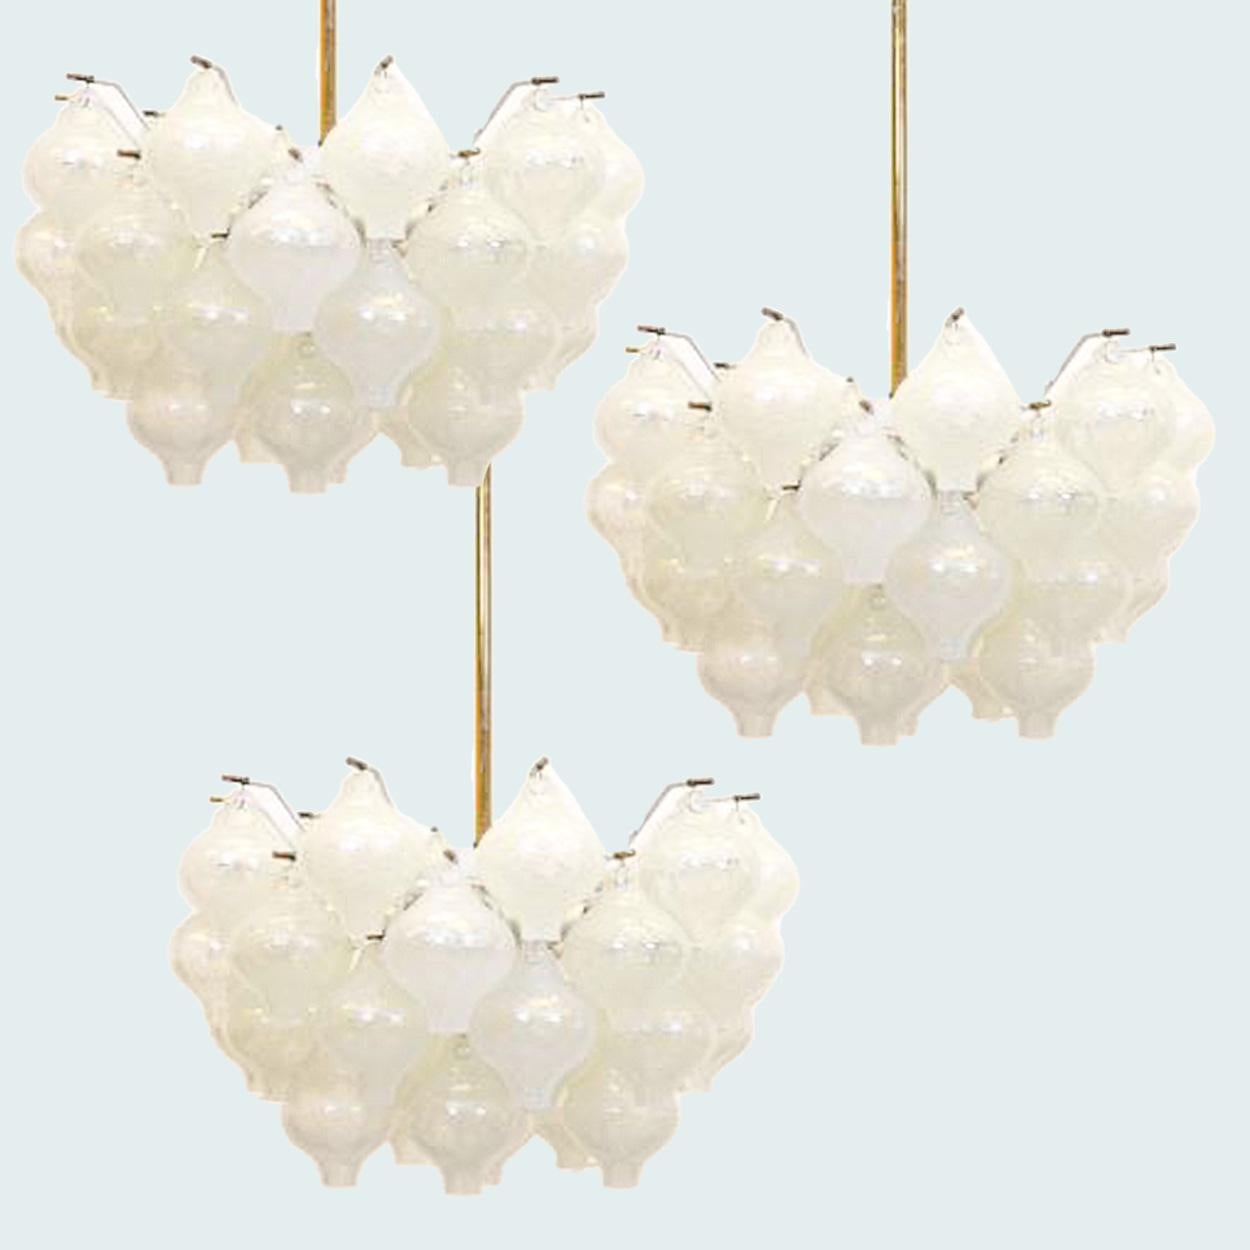 A set of 3 exceptional 'Tulipan' chandeliers by J.T. Kalmar, Austria, Vienna, manufactured in 20th century, circa 1970, (late 1960s-early 1970s). With beautiful Murano Tulipan shaped blown bubble glasses. Several glasses are mounted on a white